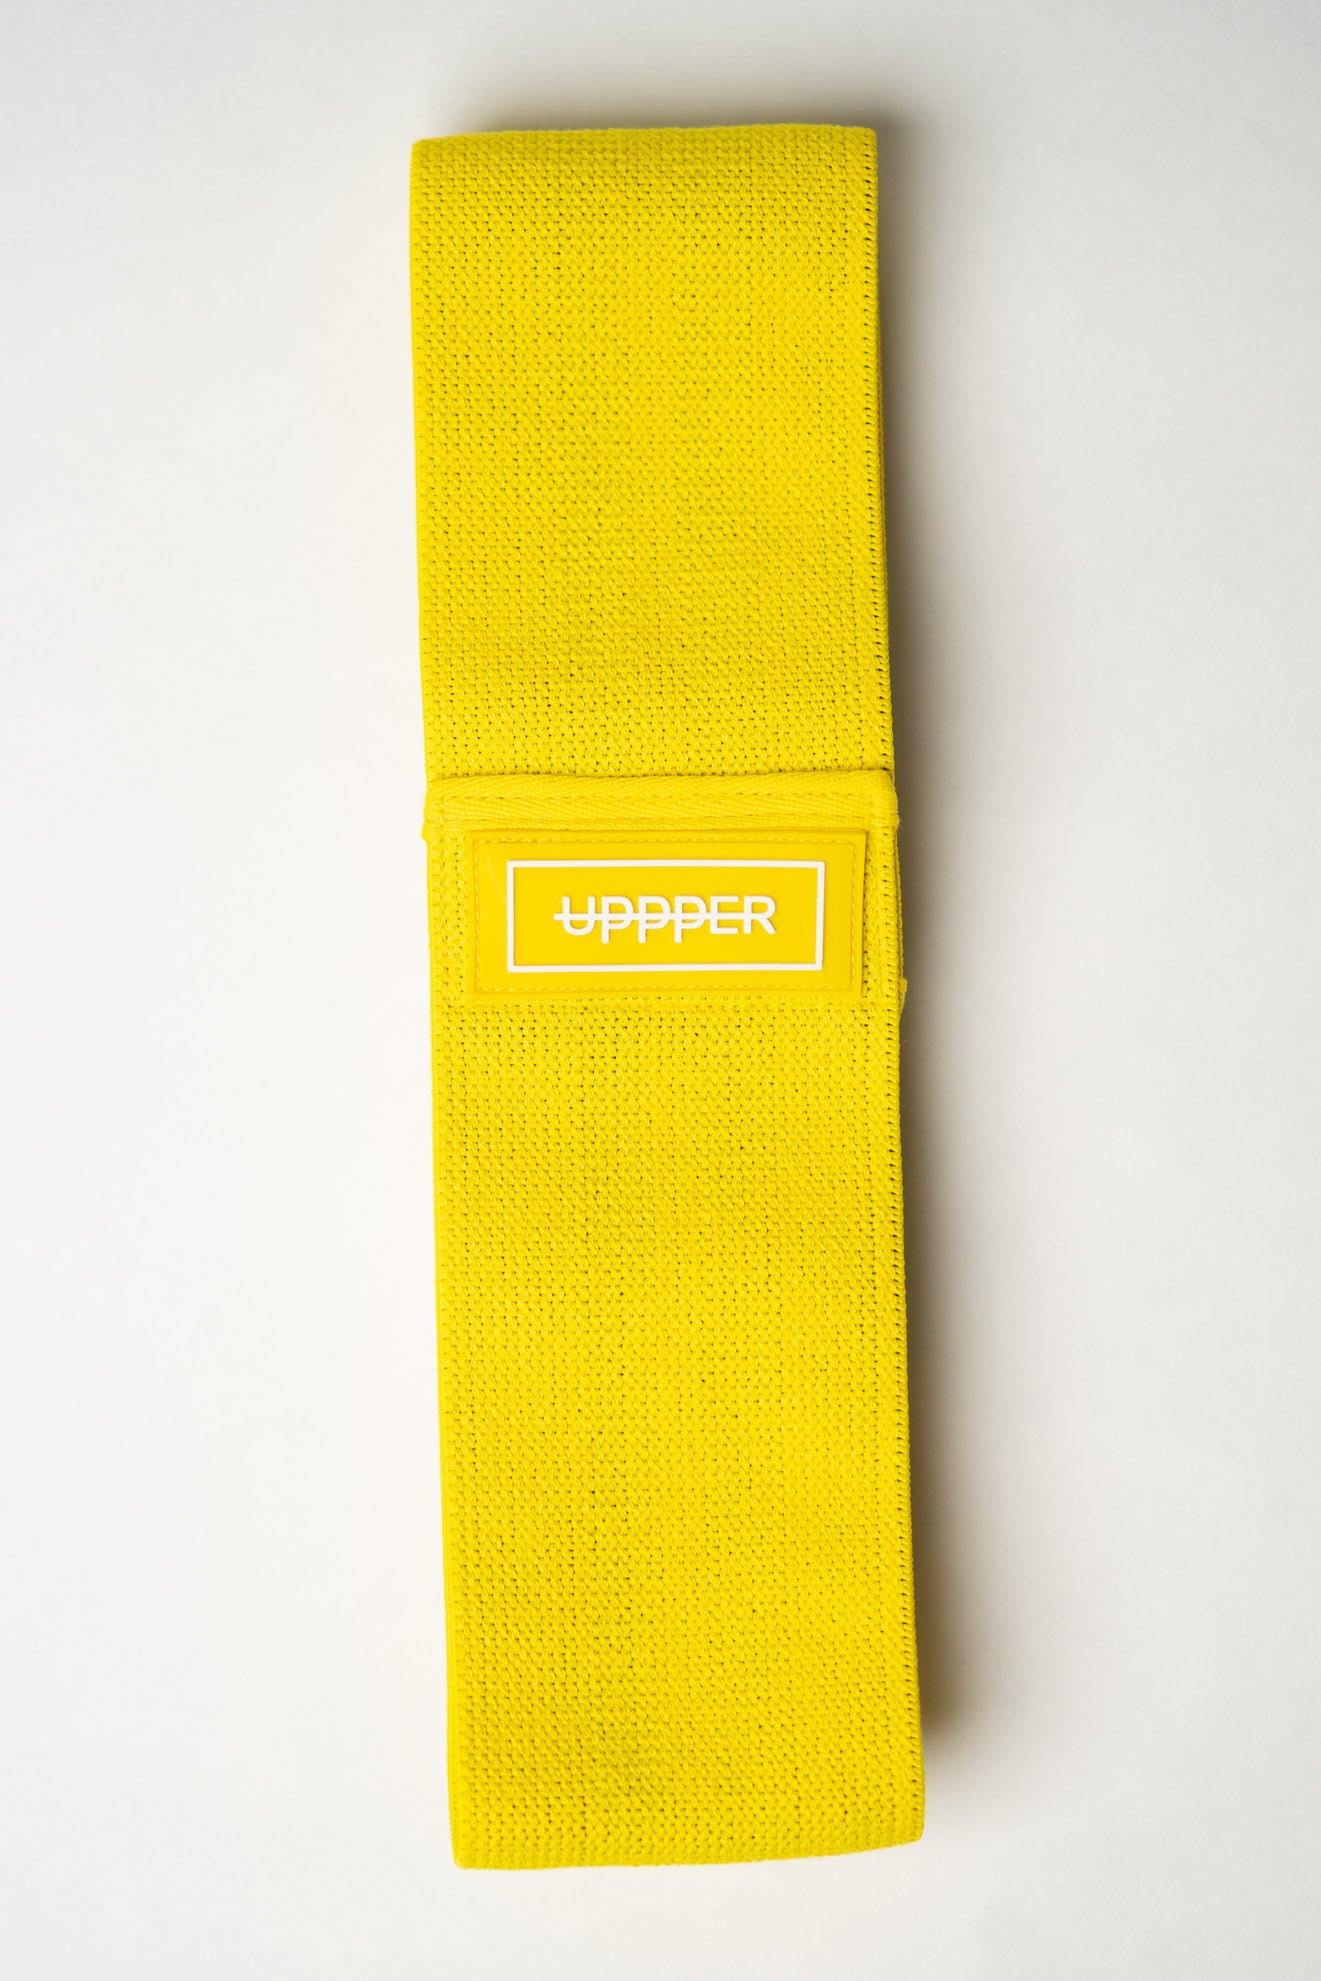 uppper hip resistance band yellow